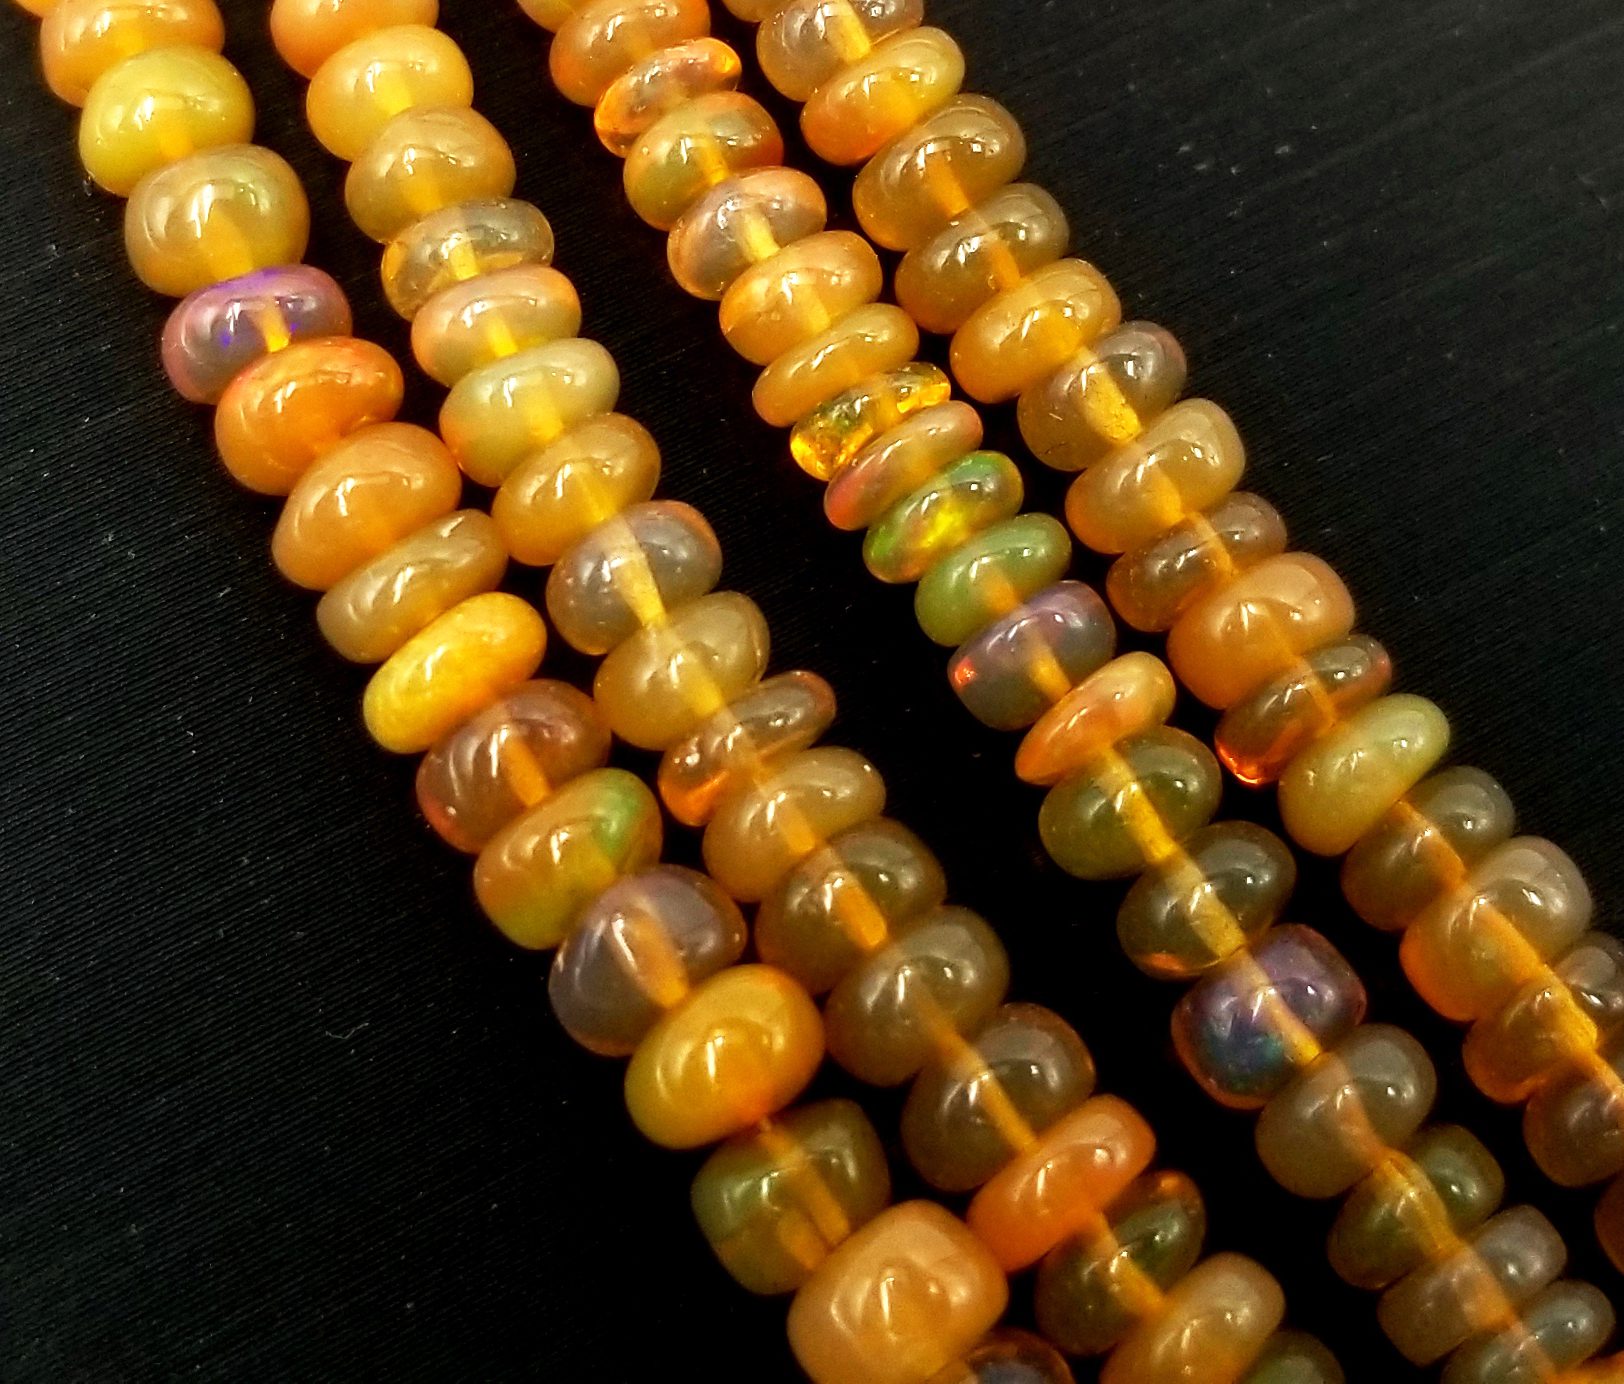 Round Natural Baltic Amber Beads 3mm Yellow Perles Ambre Genuine Baltic Amber Beads